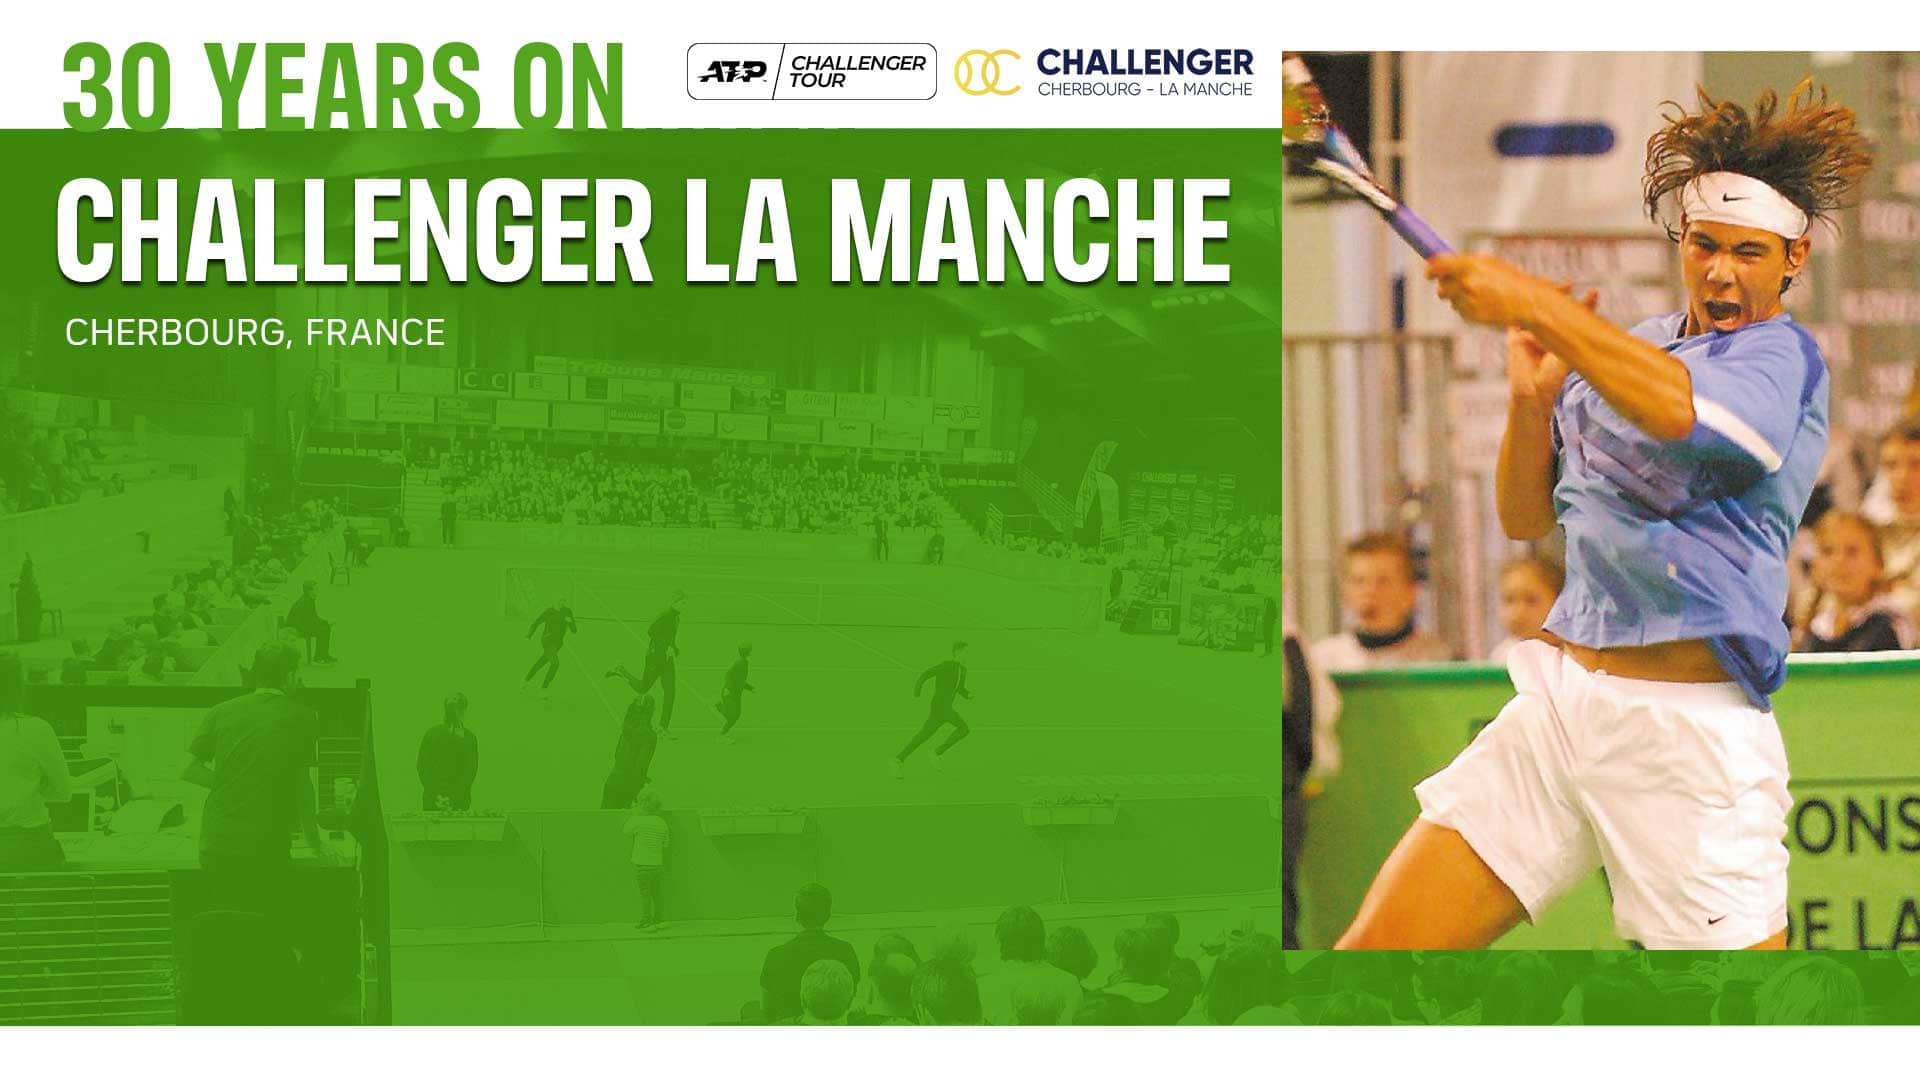 The Cherbourg Challenger is the longest-running French Challenger.